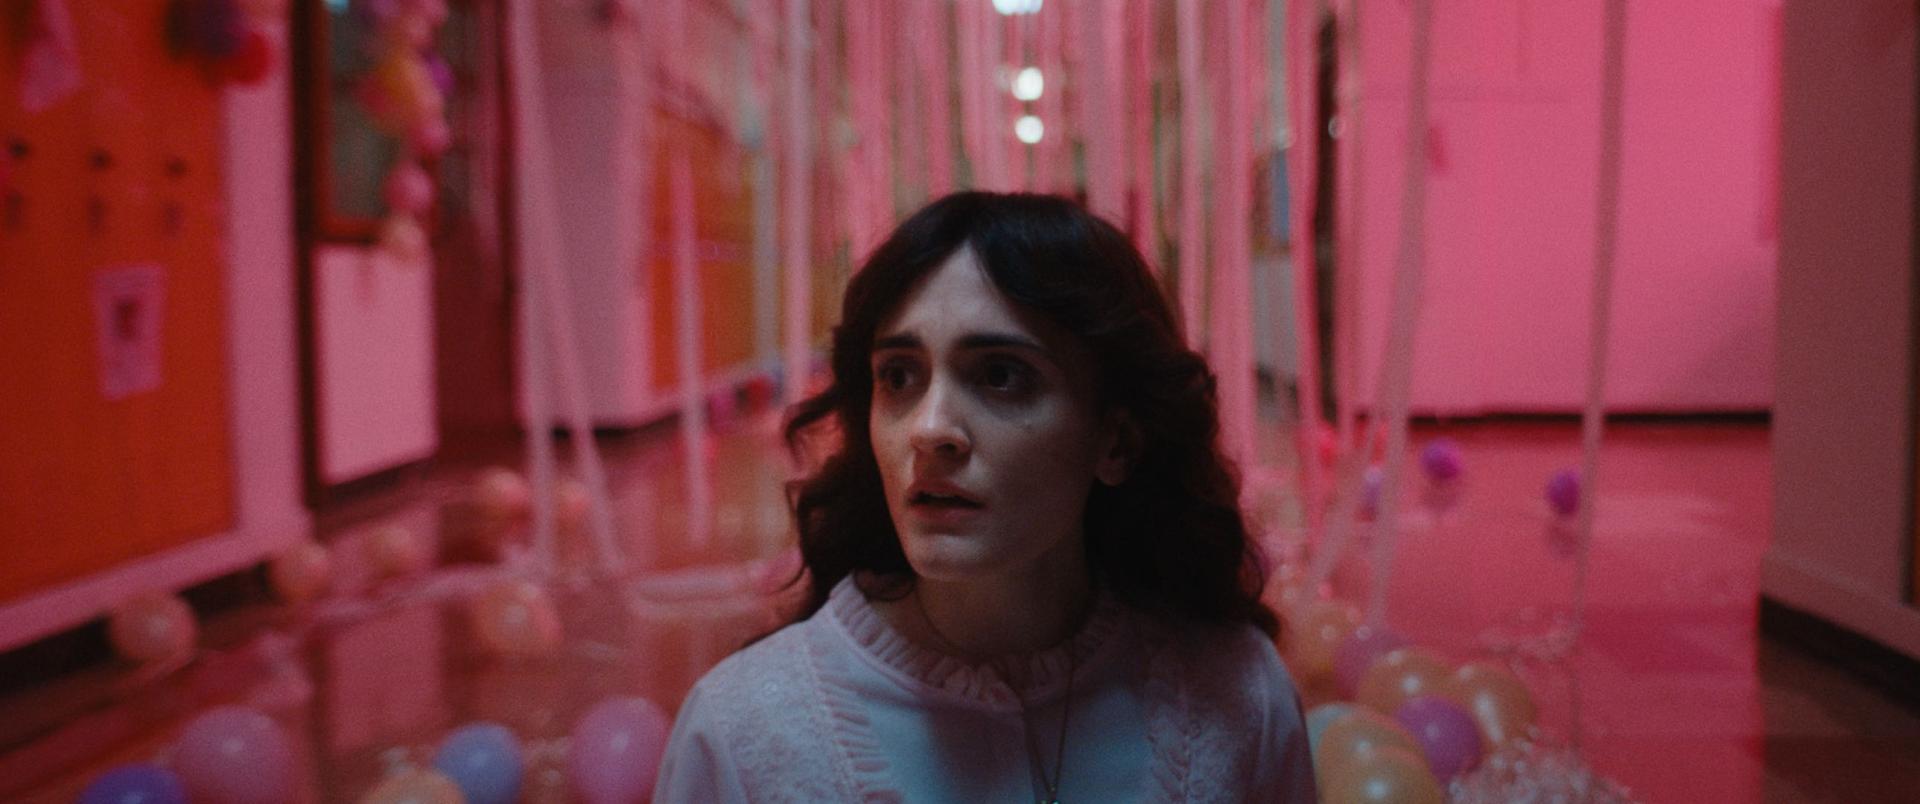 A brunette teen girl in a nightgown looks frightened in an eerie hallway surrounded by pink lighting and prom old balloons and streamers.